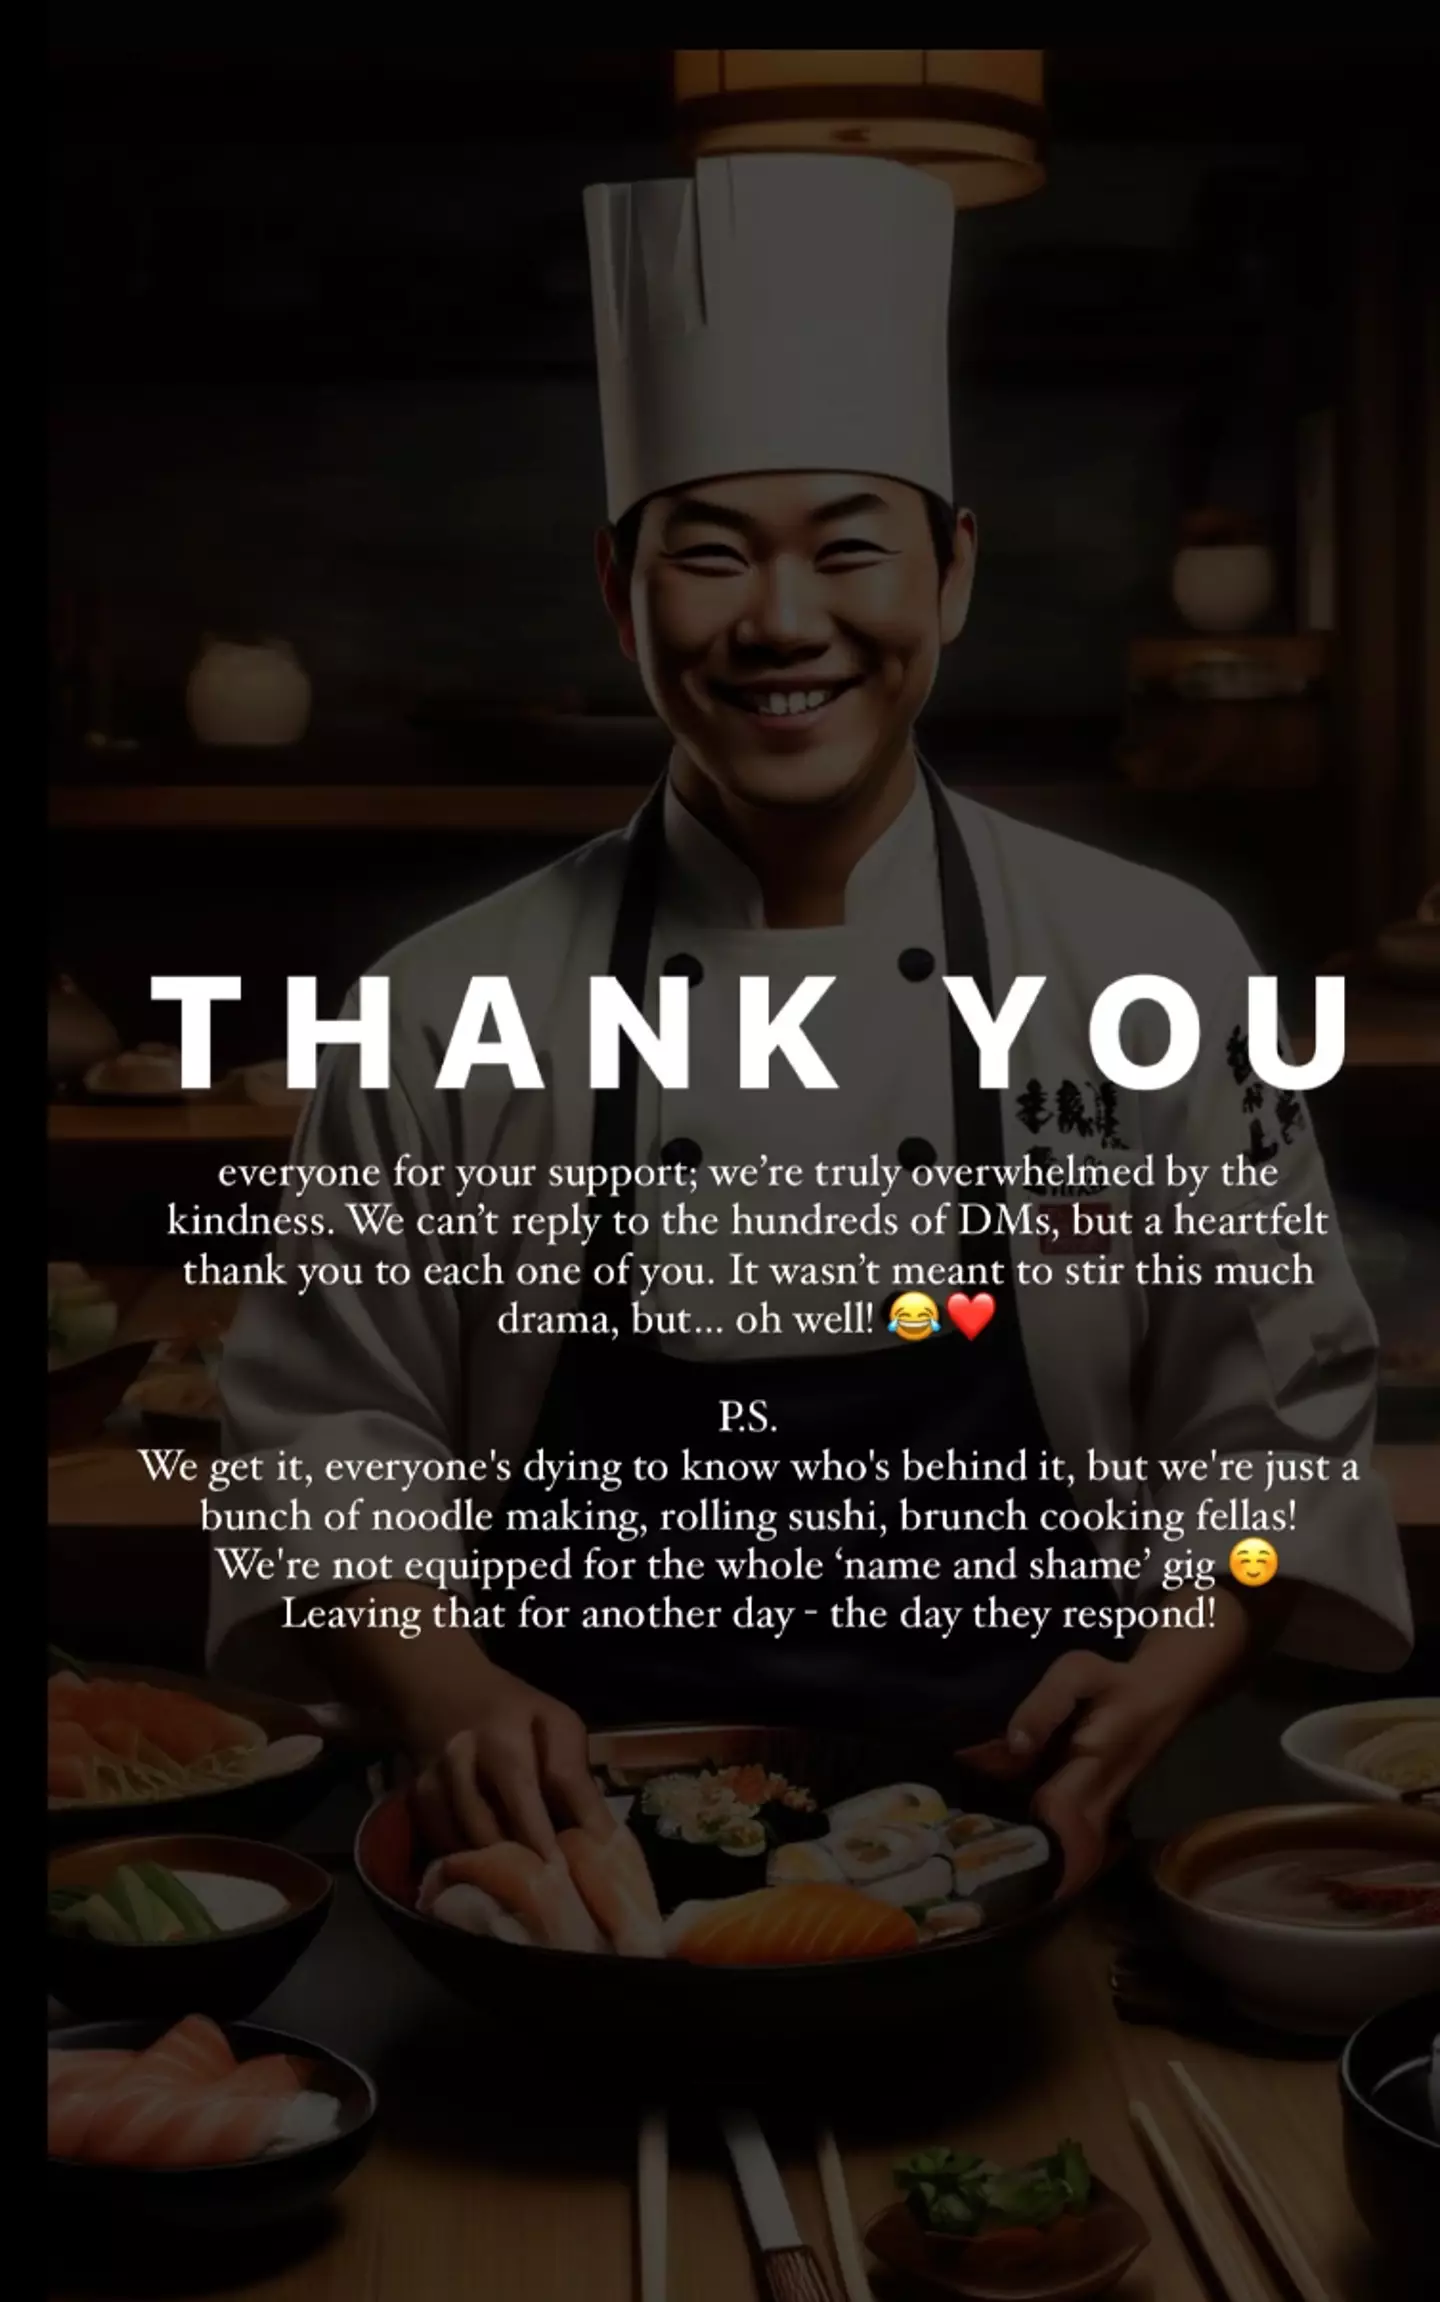 The eatery has since thanked fans for their support and claim they won't be naming the influencer.